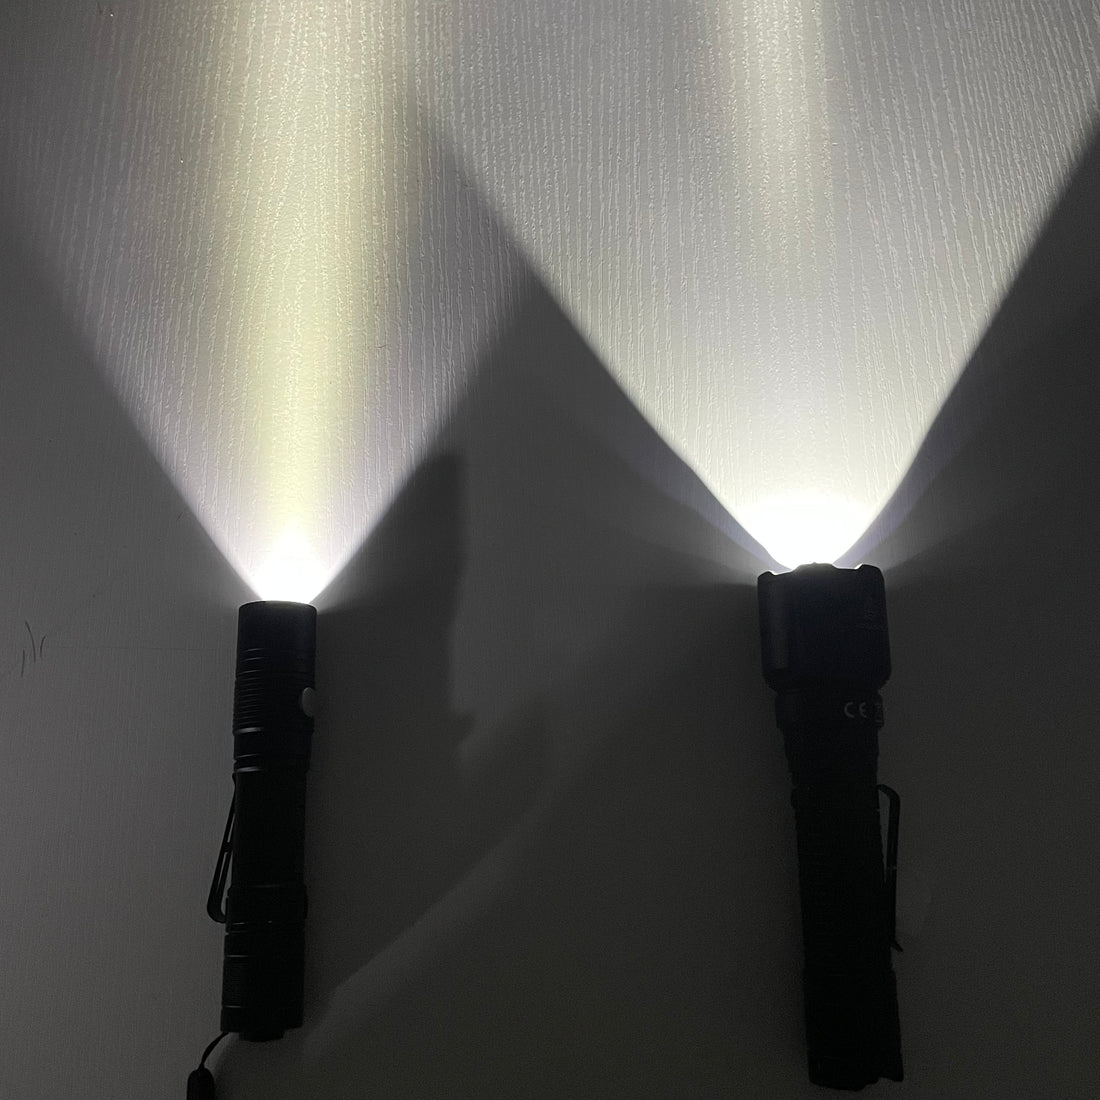 The different Light beam and illustrations between K3 and P20